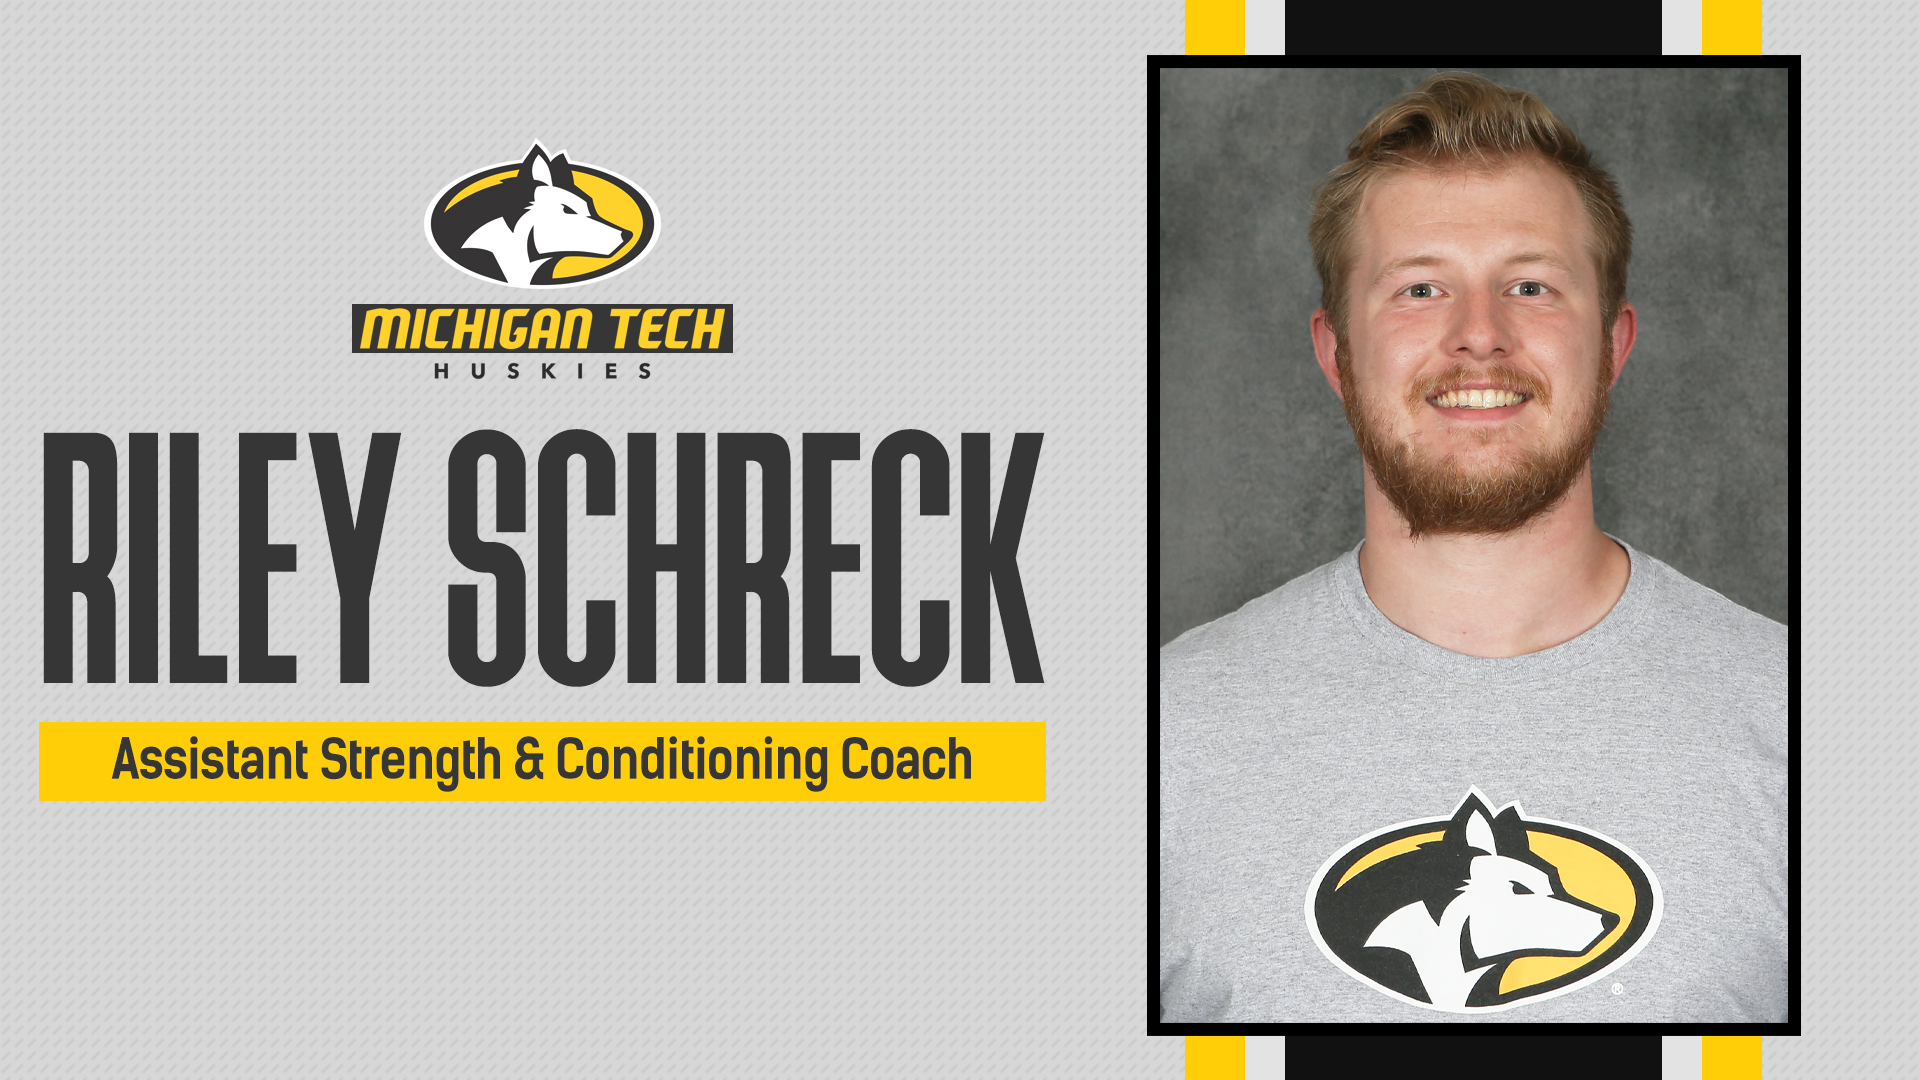 Schreck Hired as Assistant Strength & Conditioning Coach